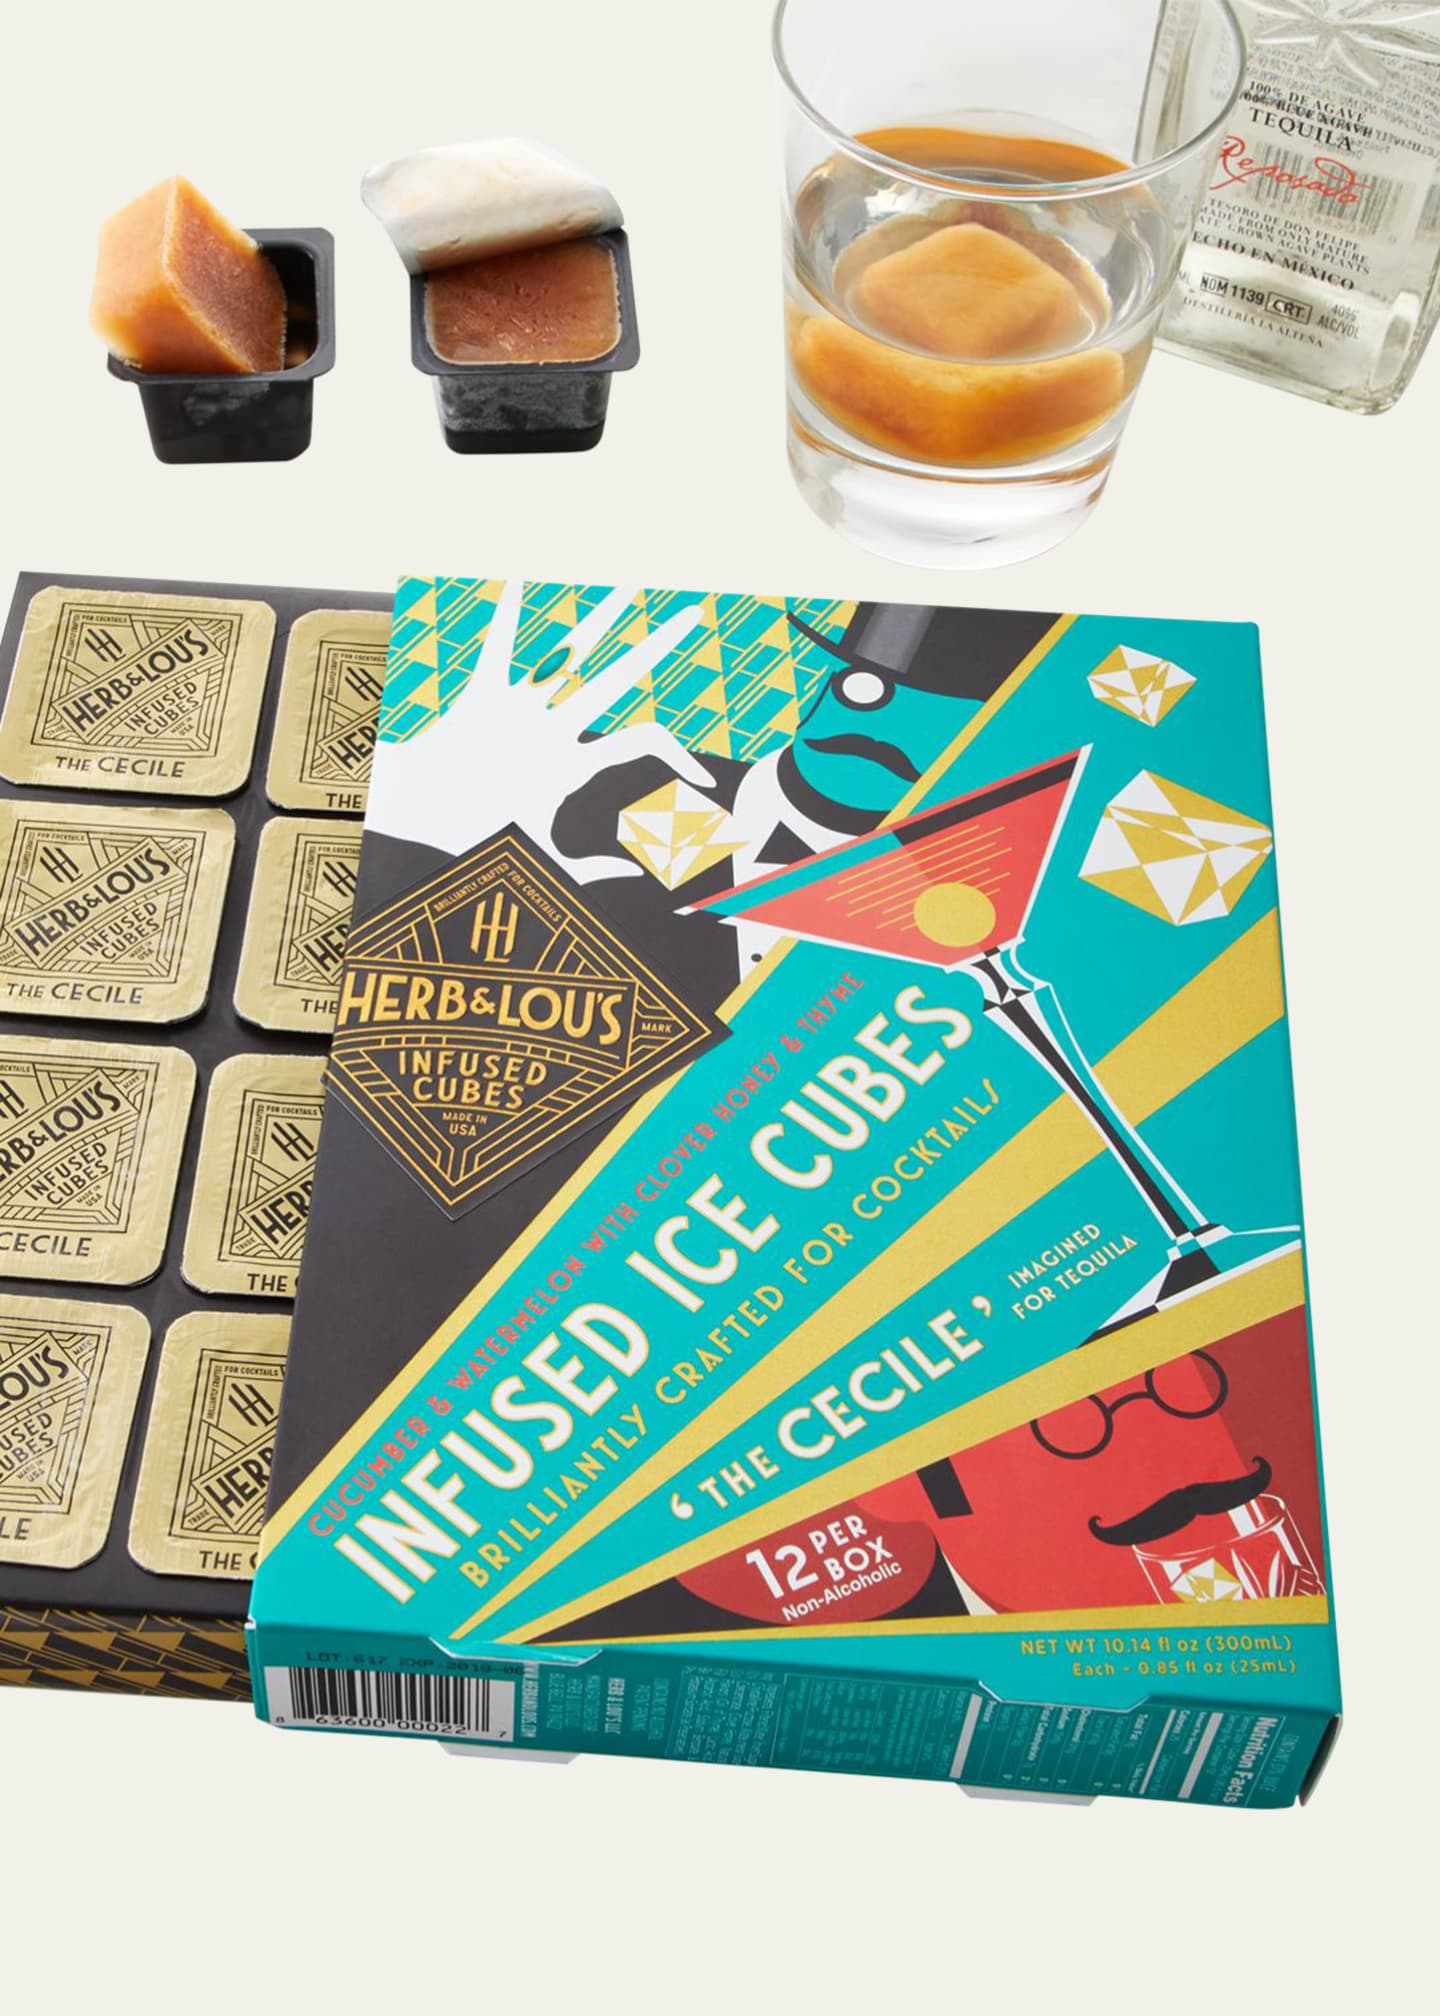 Herb & Lou's Infused Cubes The Cecile Infused Ice Cubes - Bergdorf Goodman